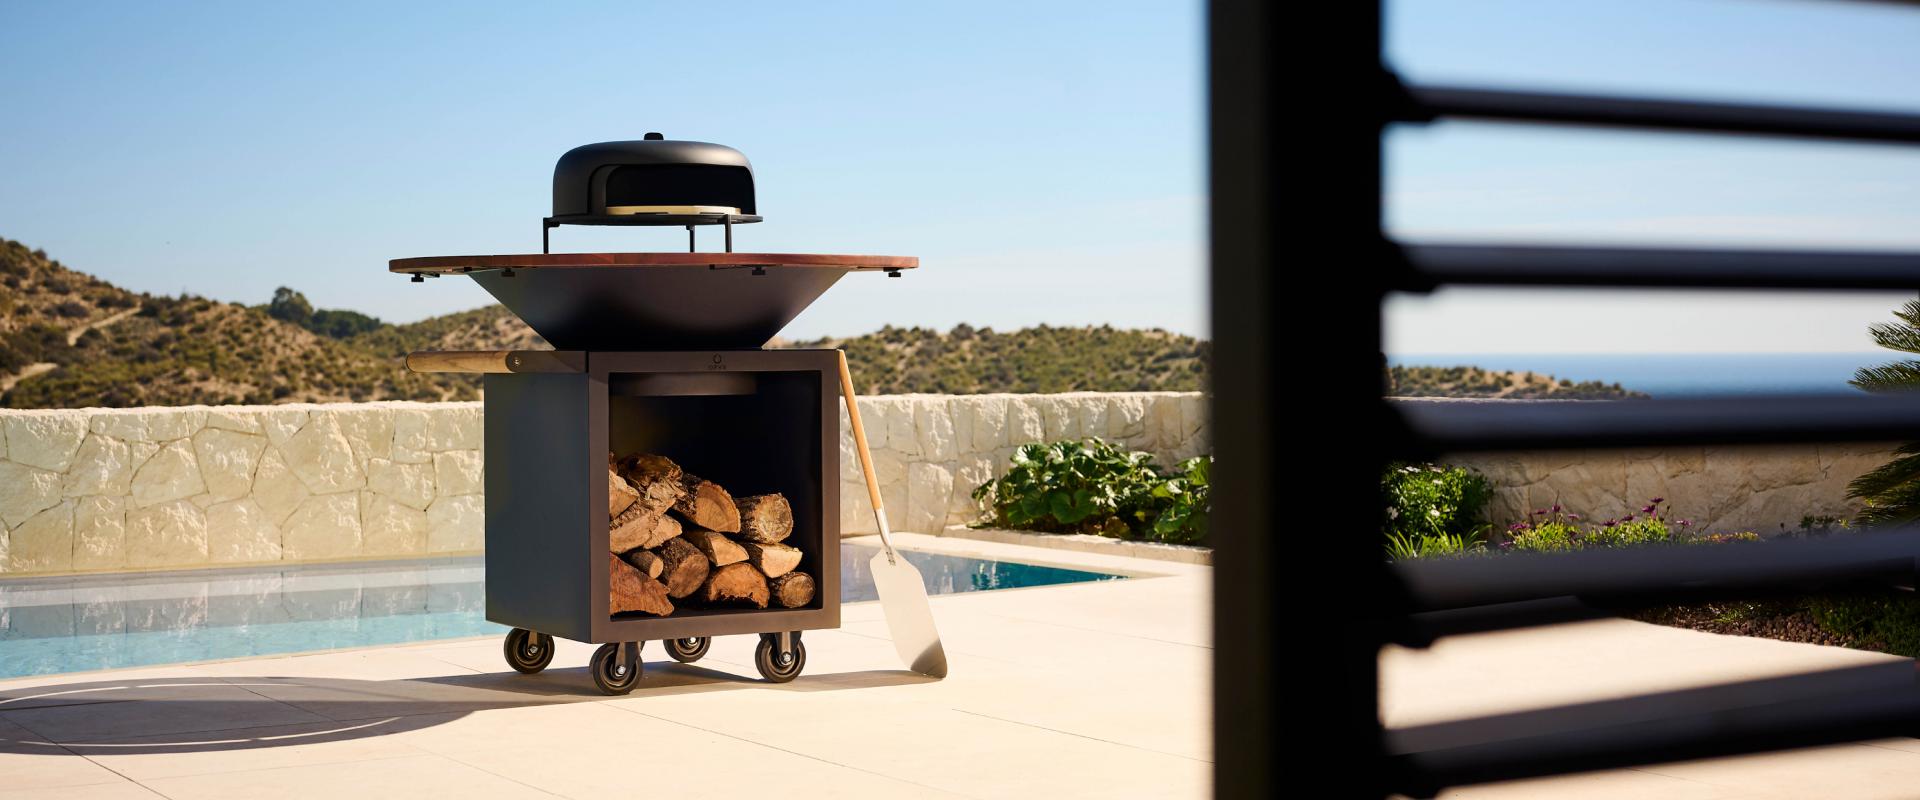 The Pizza Oven is the trend of this summer